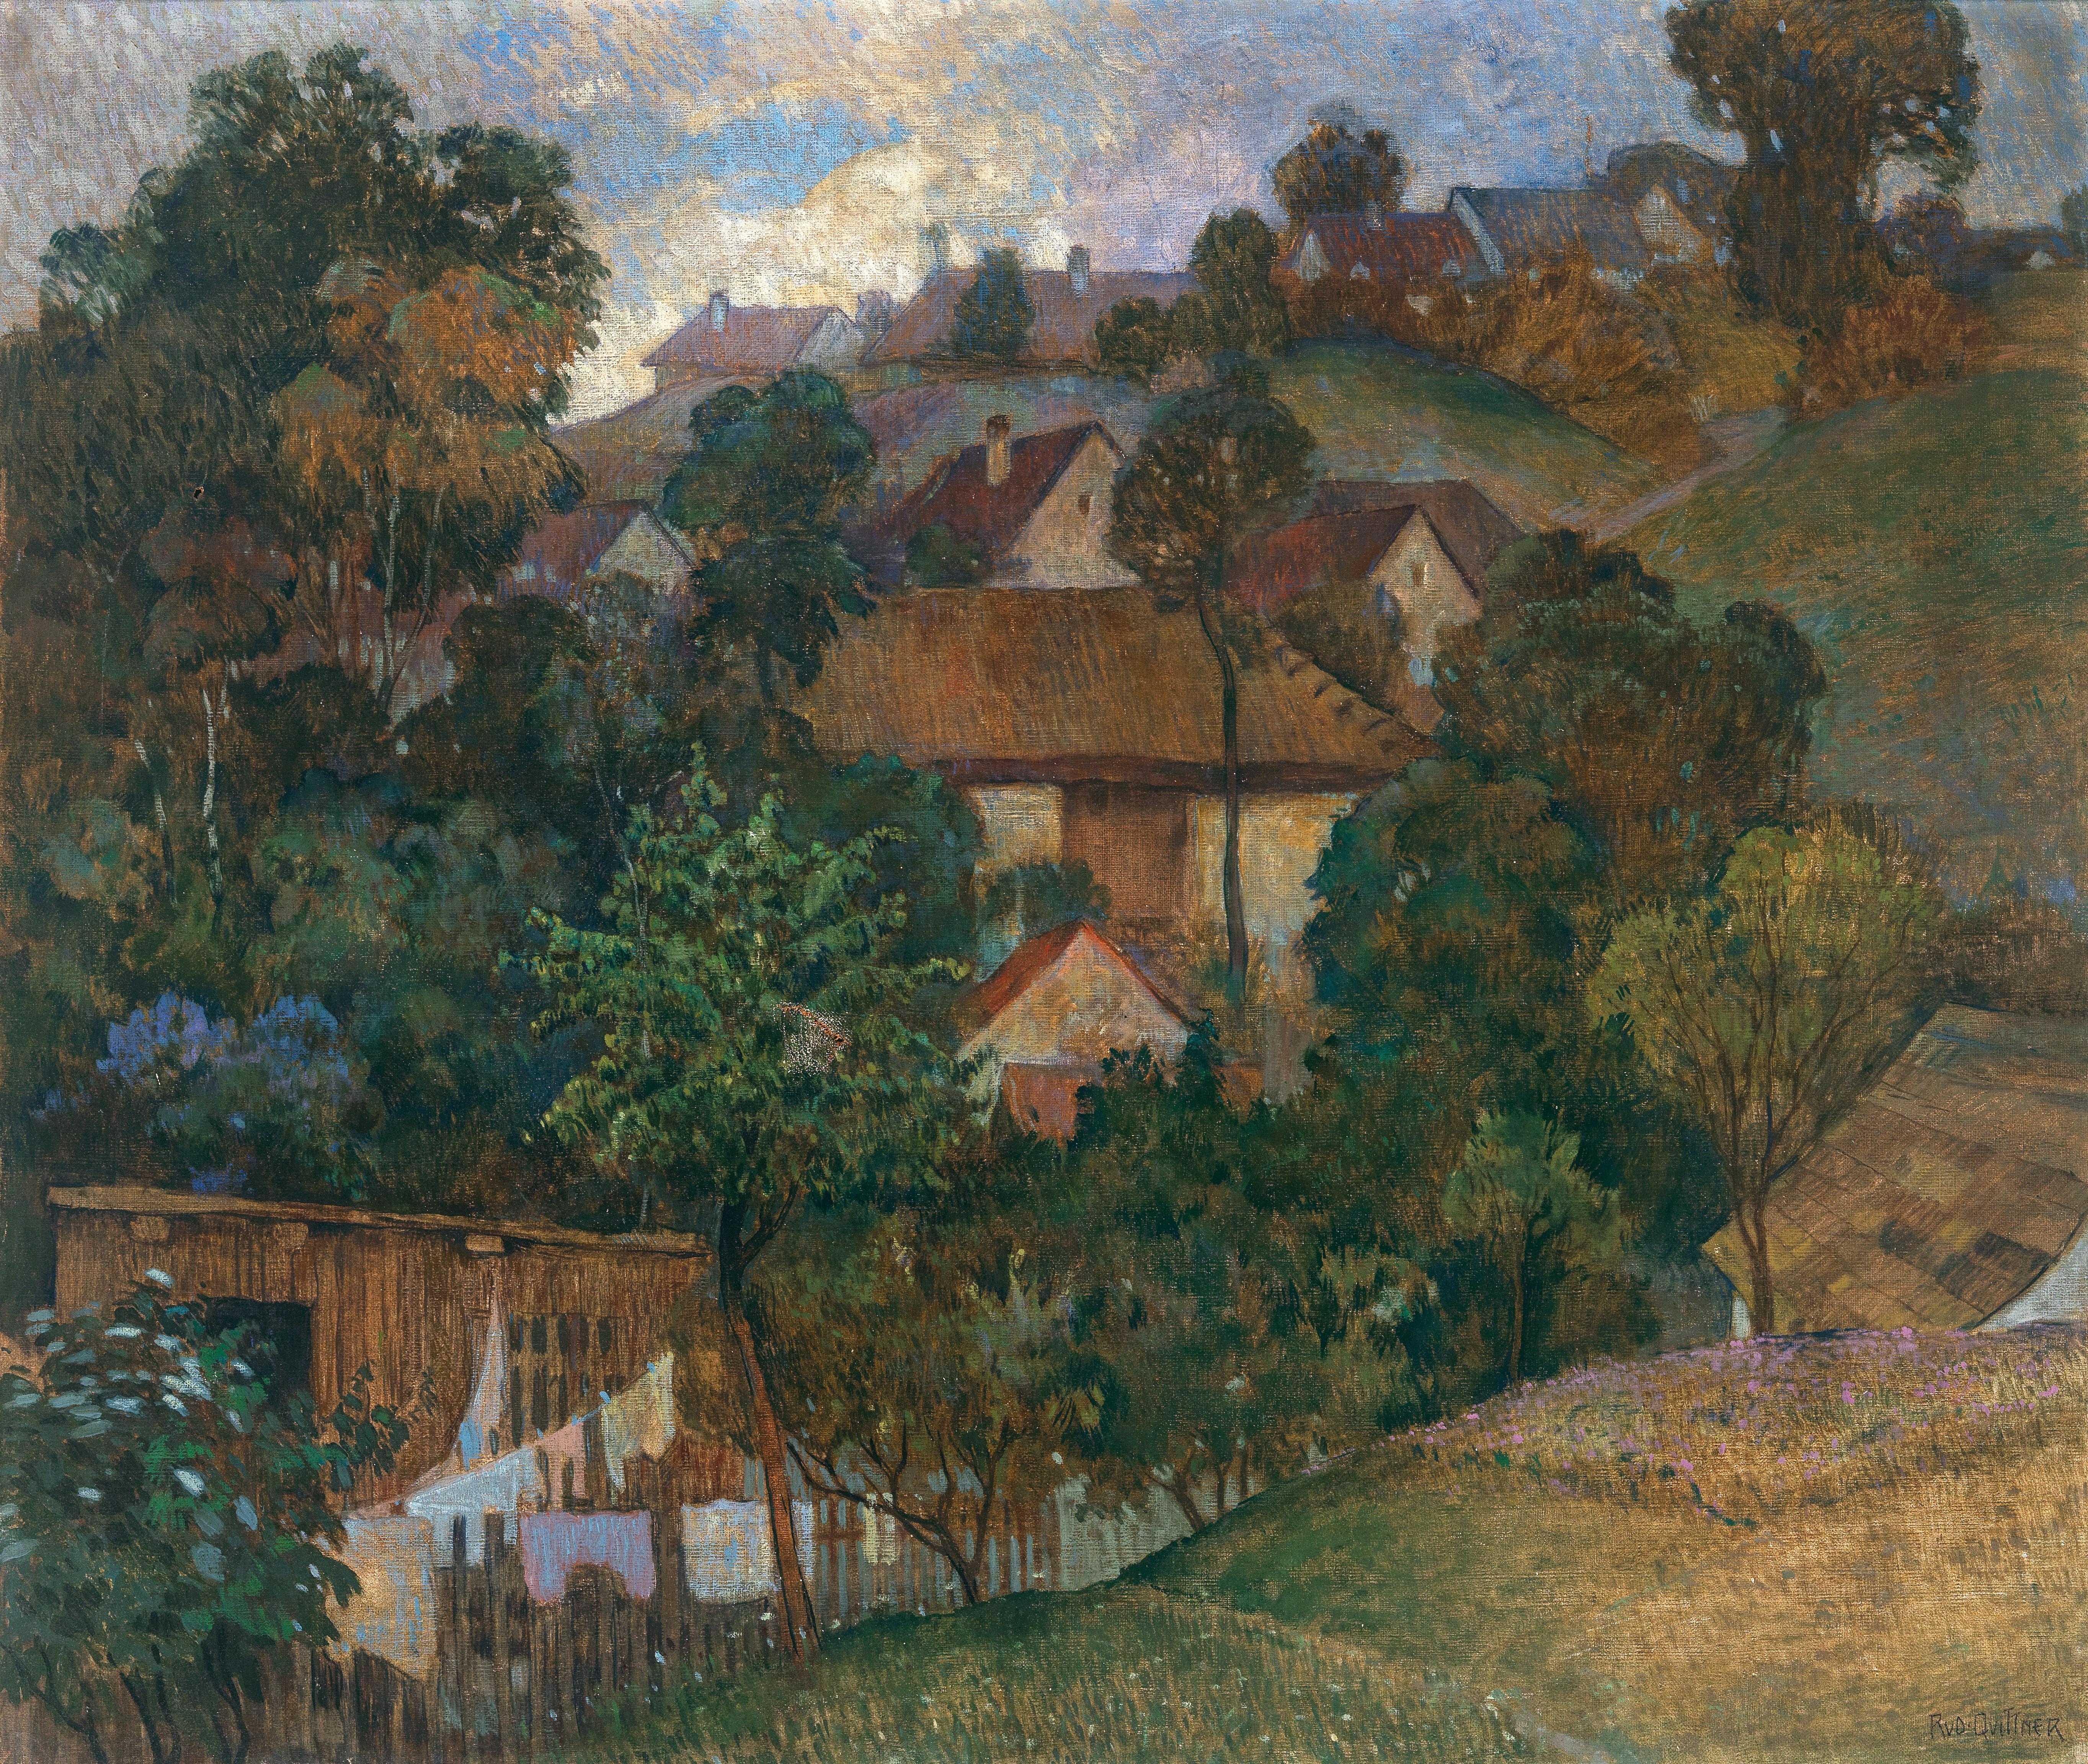 A View of a Village, Laundry on the Line by Rudolf Quittner